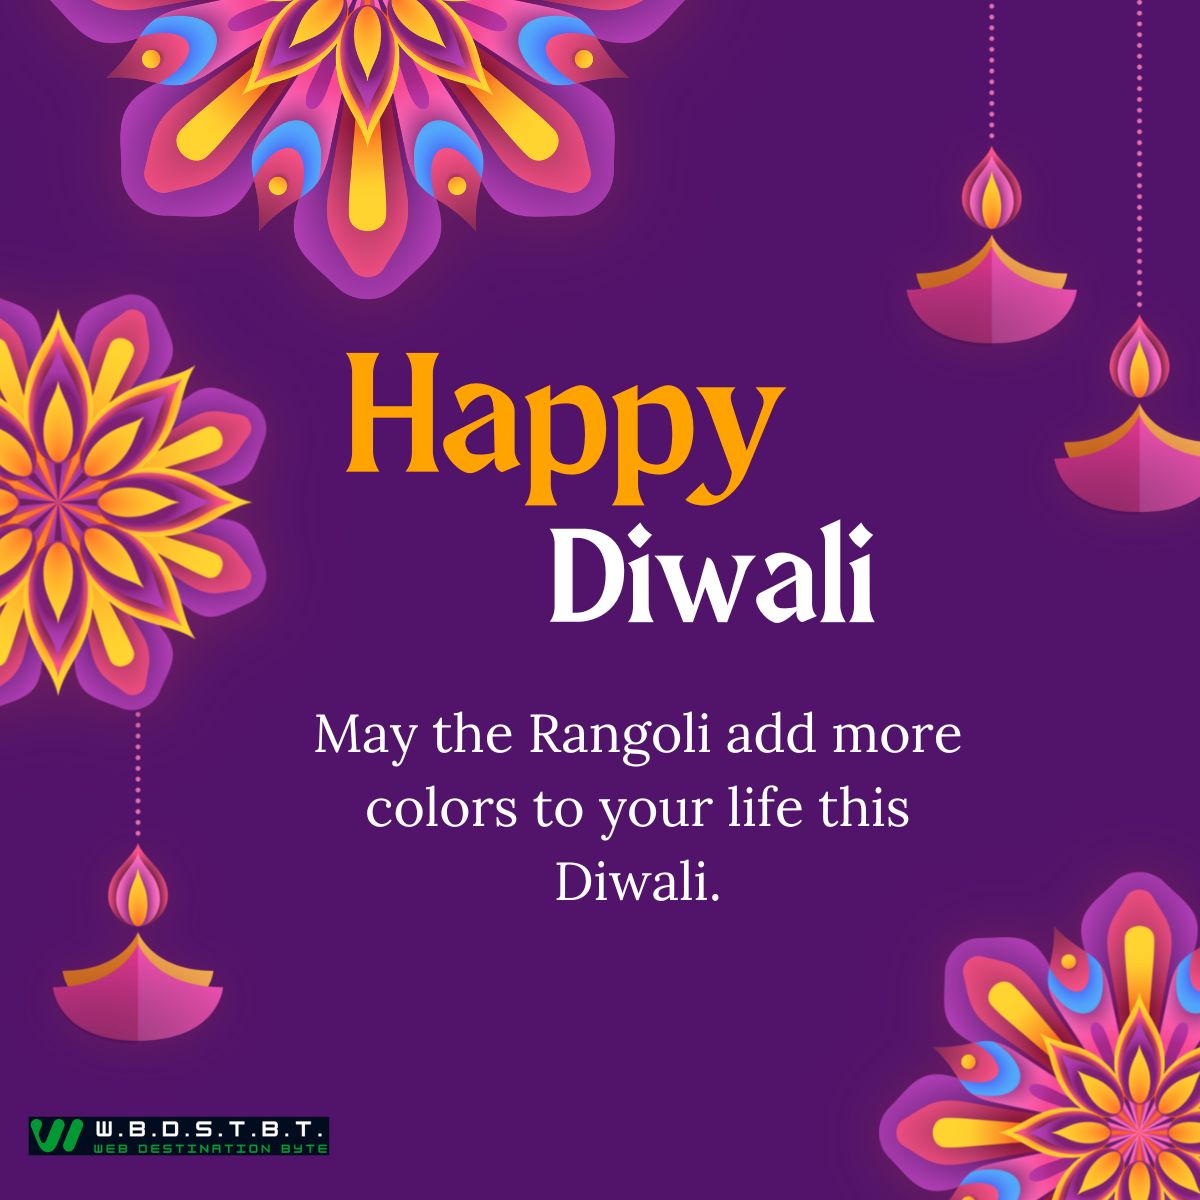 May the Rangoli add more colors to your life this Diwali.